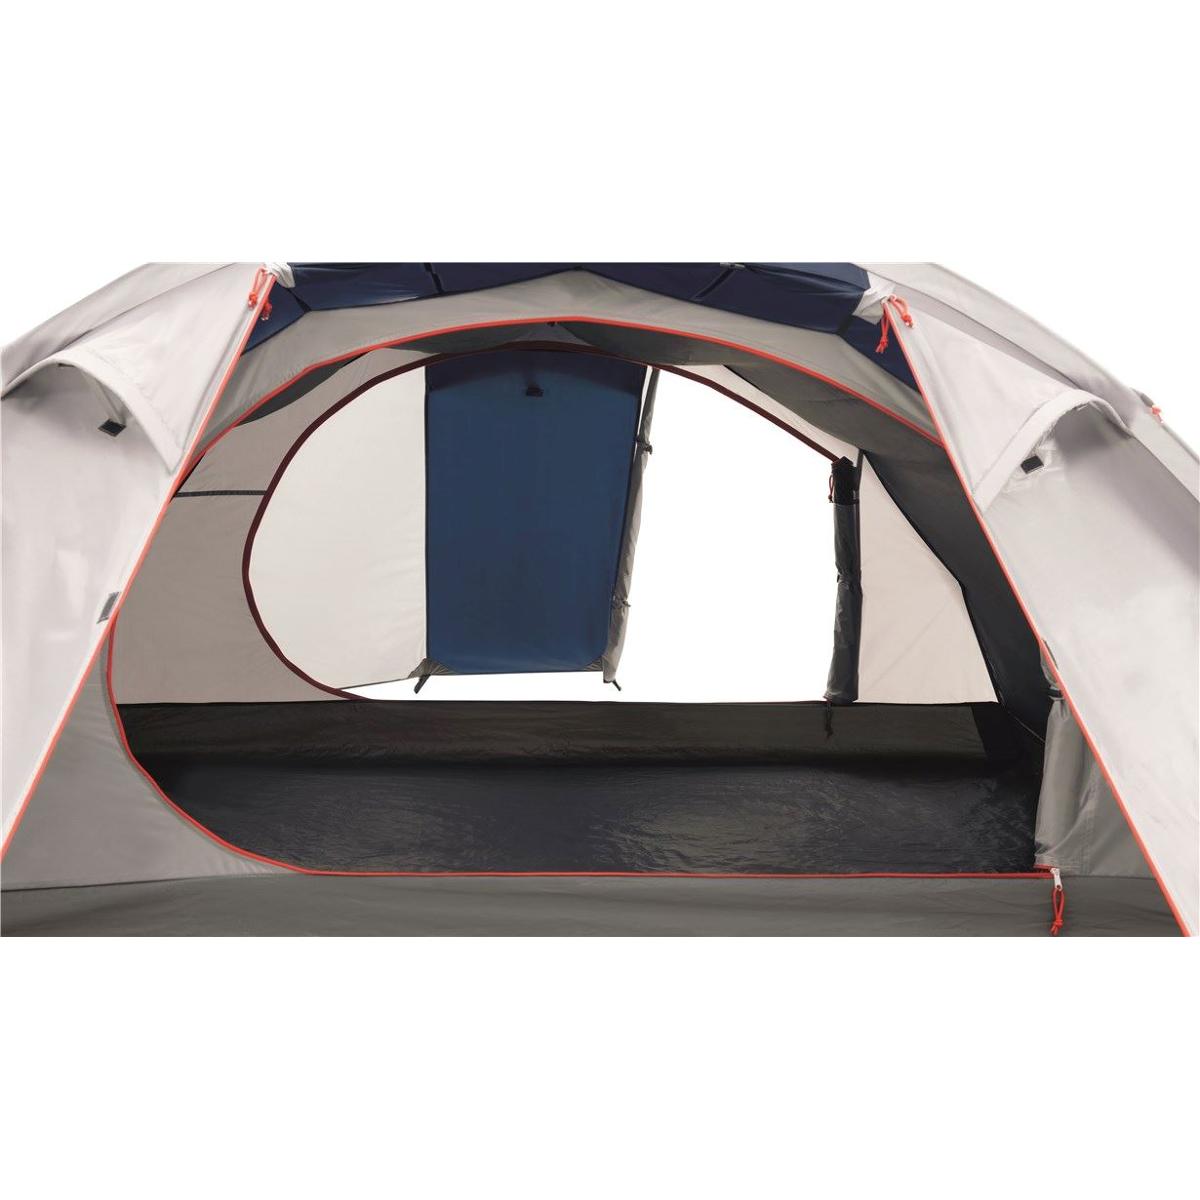 Easy Camp Vega Camping Wagner Tunnelzelt, Compact blau 3-Personen, 300 240x235cm, Campingzubehör bei